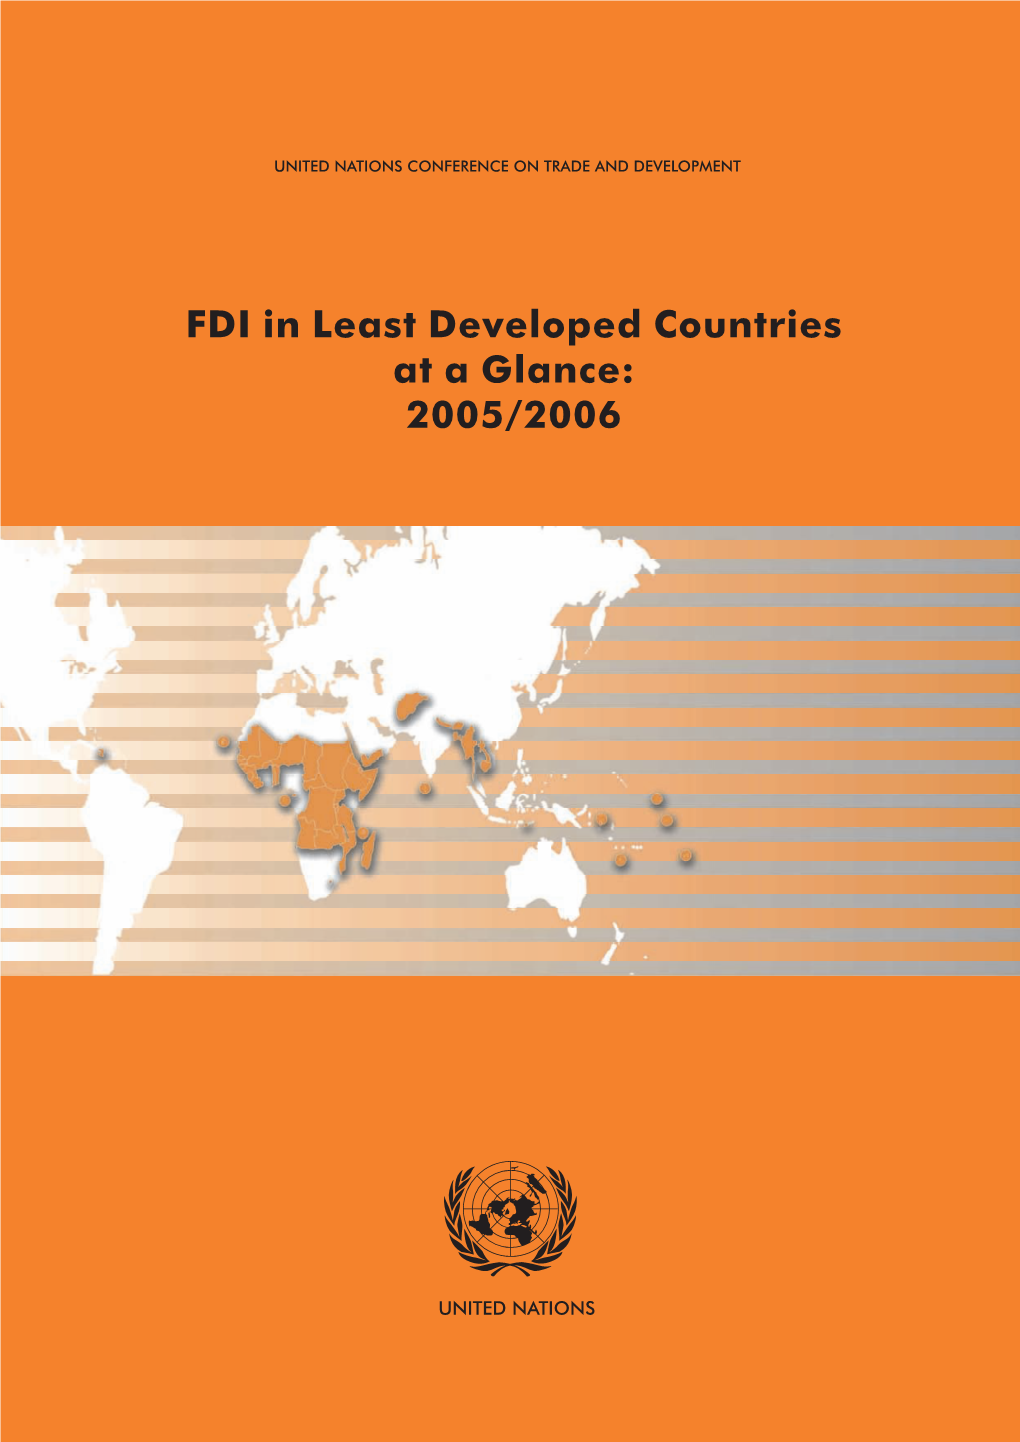 FDI in Least Developed Countries at a Glance: 2005/2006 UNITED NATIONS I United Nations Conference on Trade and Development